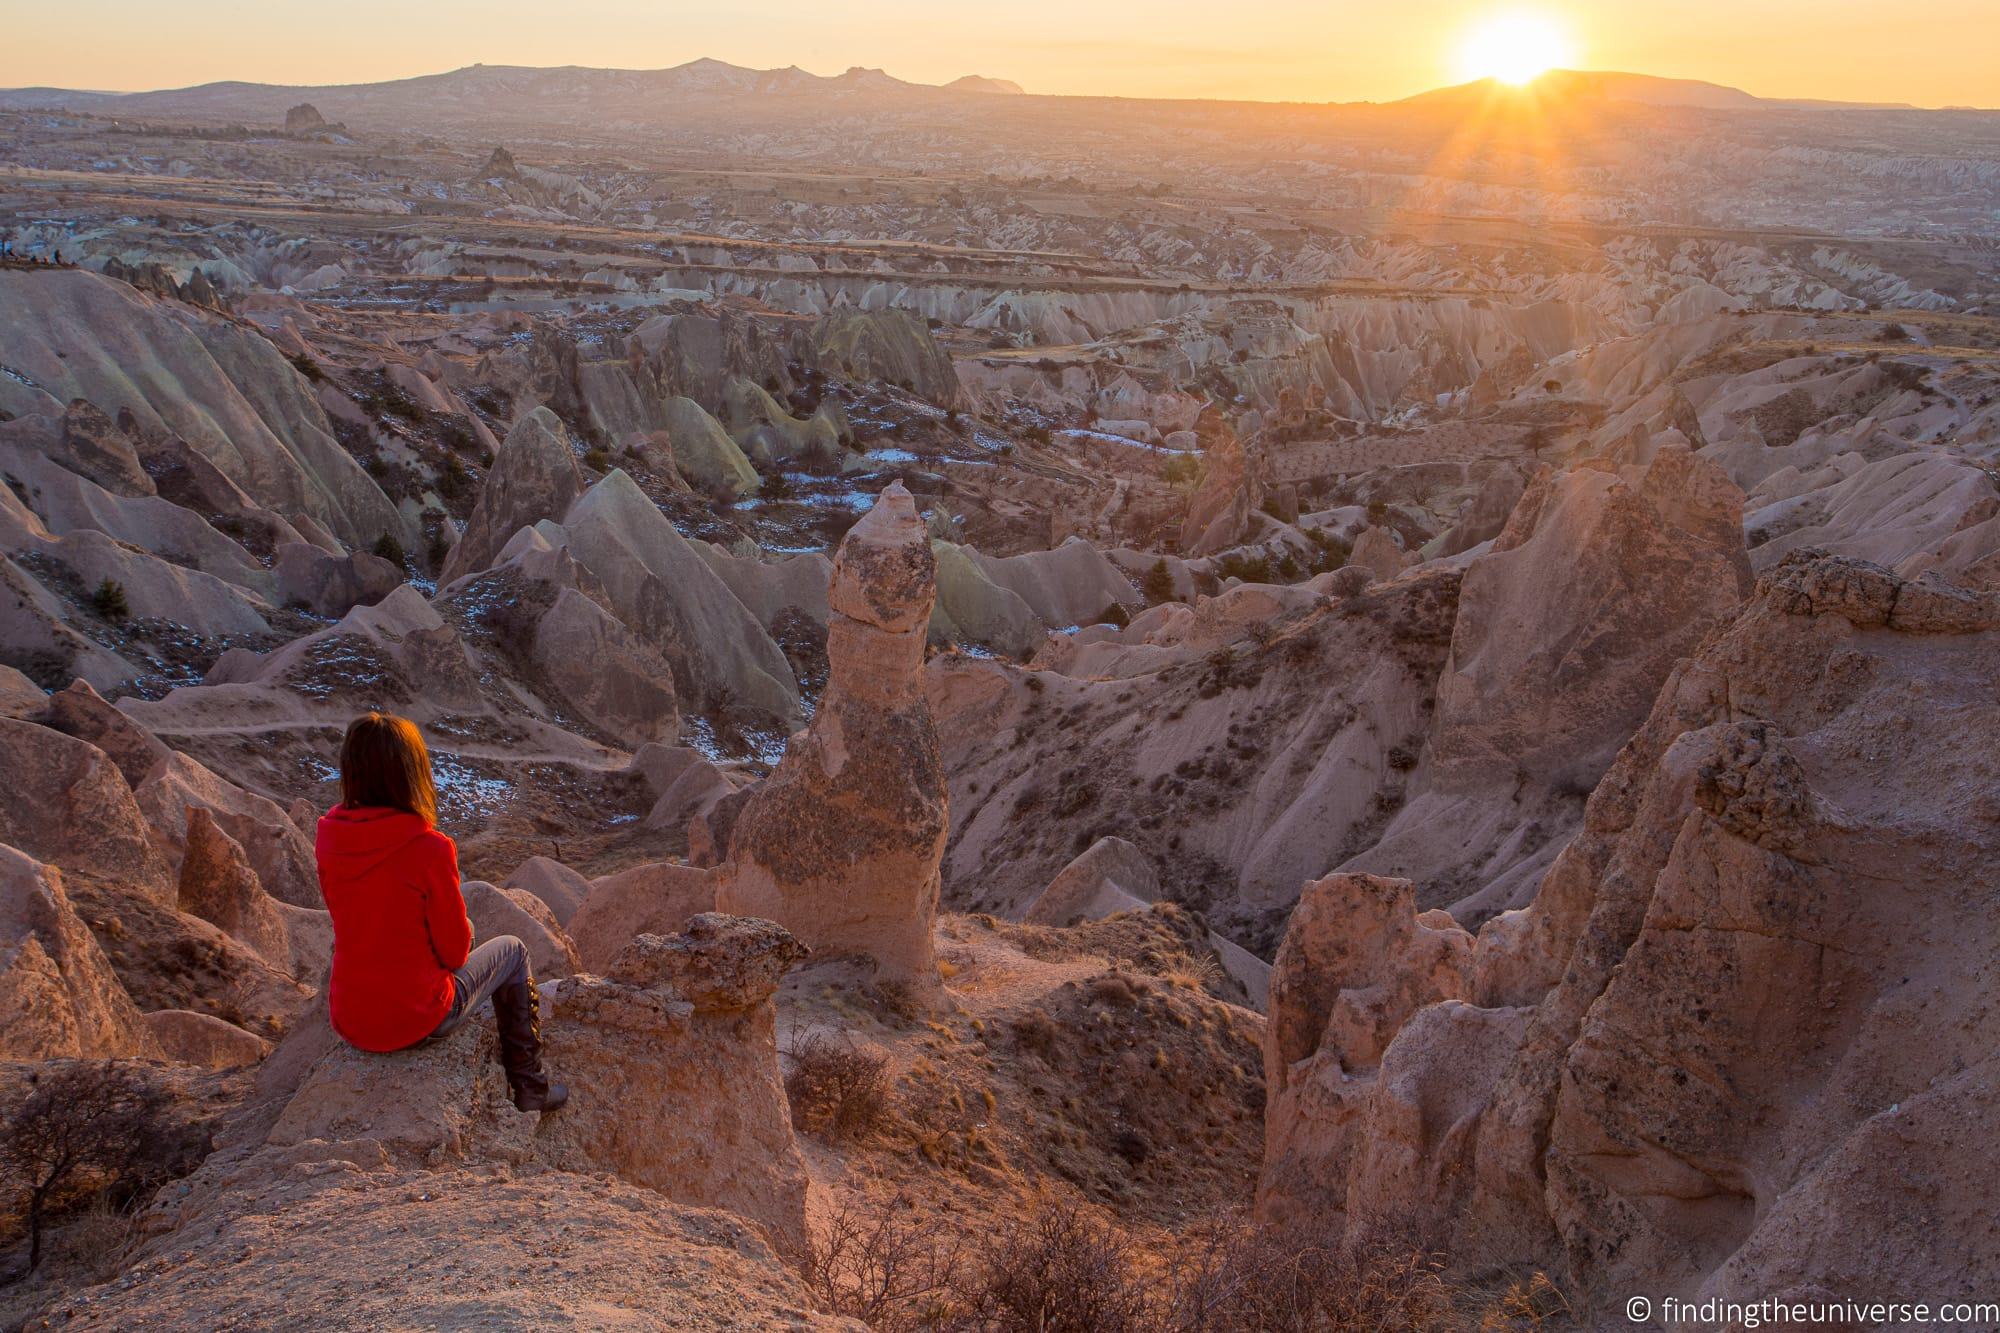 Things to do in Cappadocia Turkey - A Detailed Guide to Help You Plan!